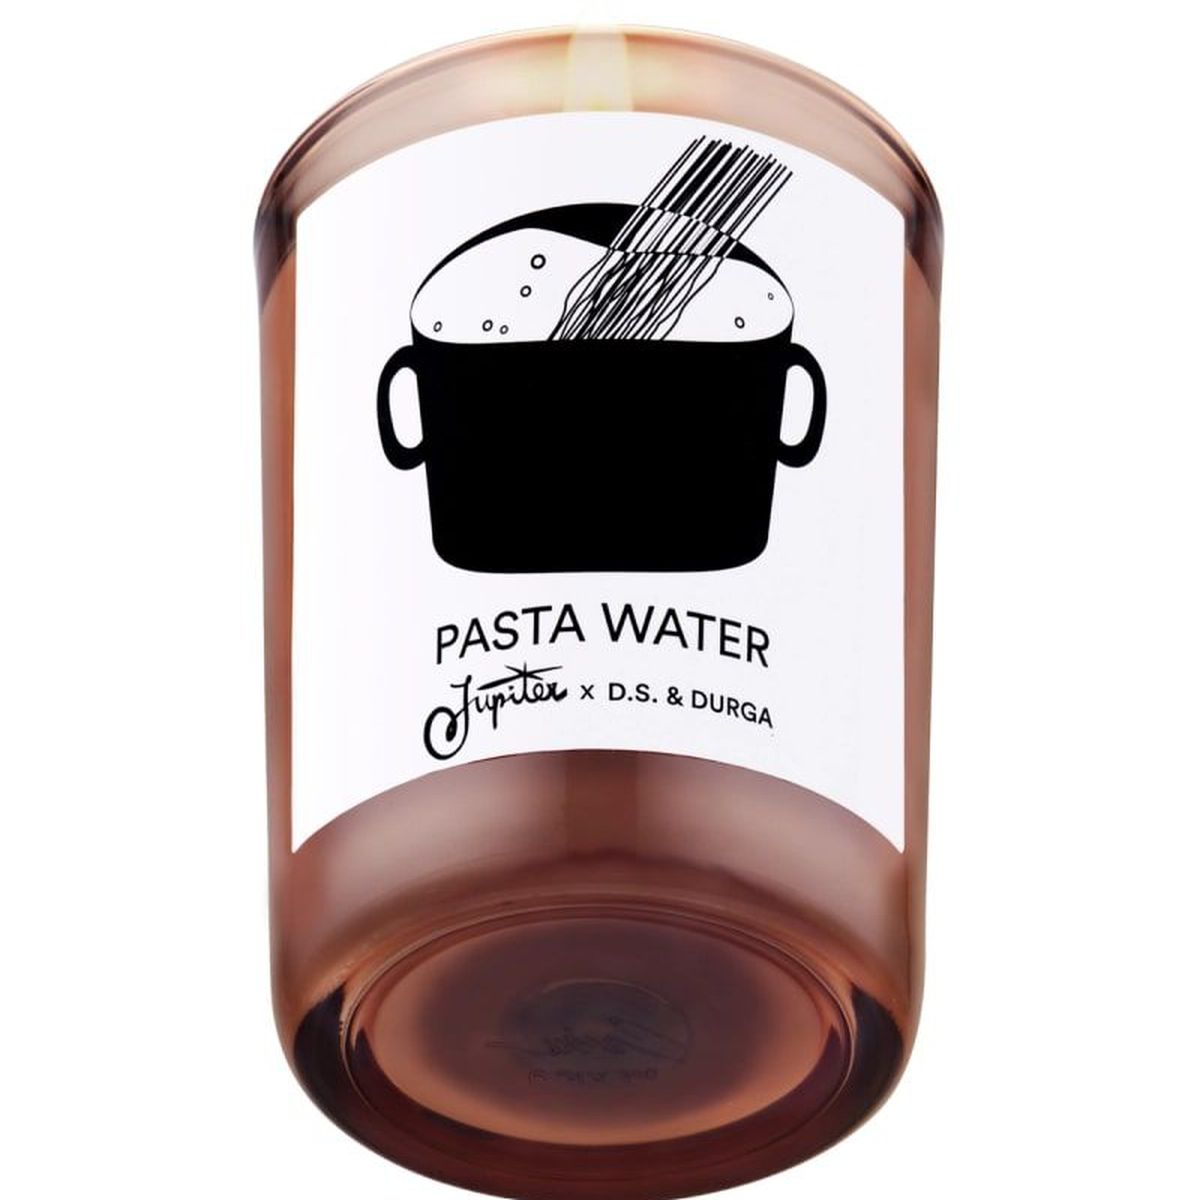 A D.S. and Durga pasta water candle